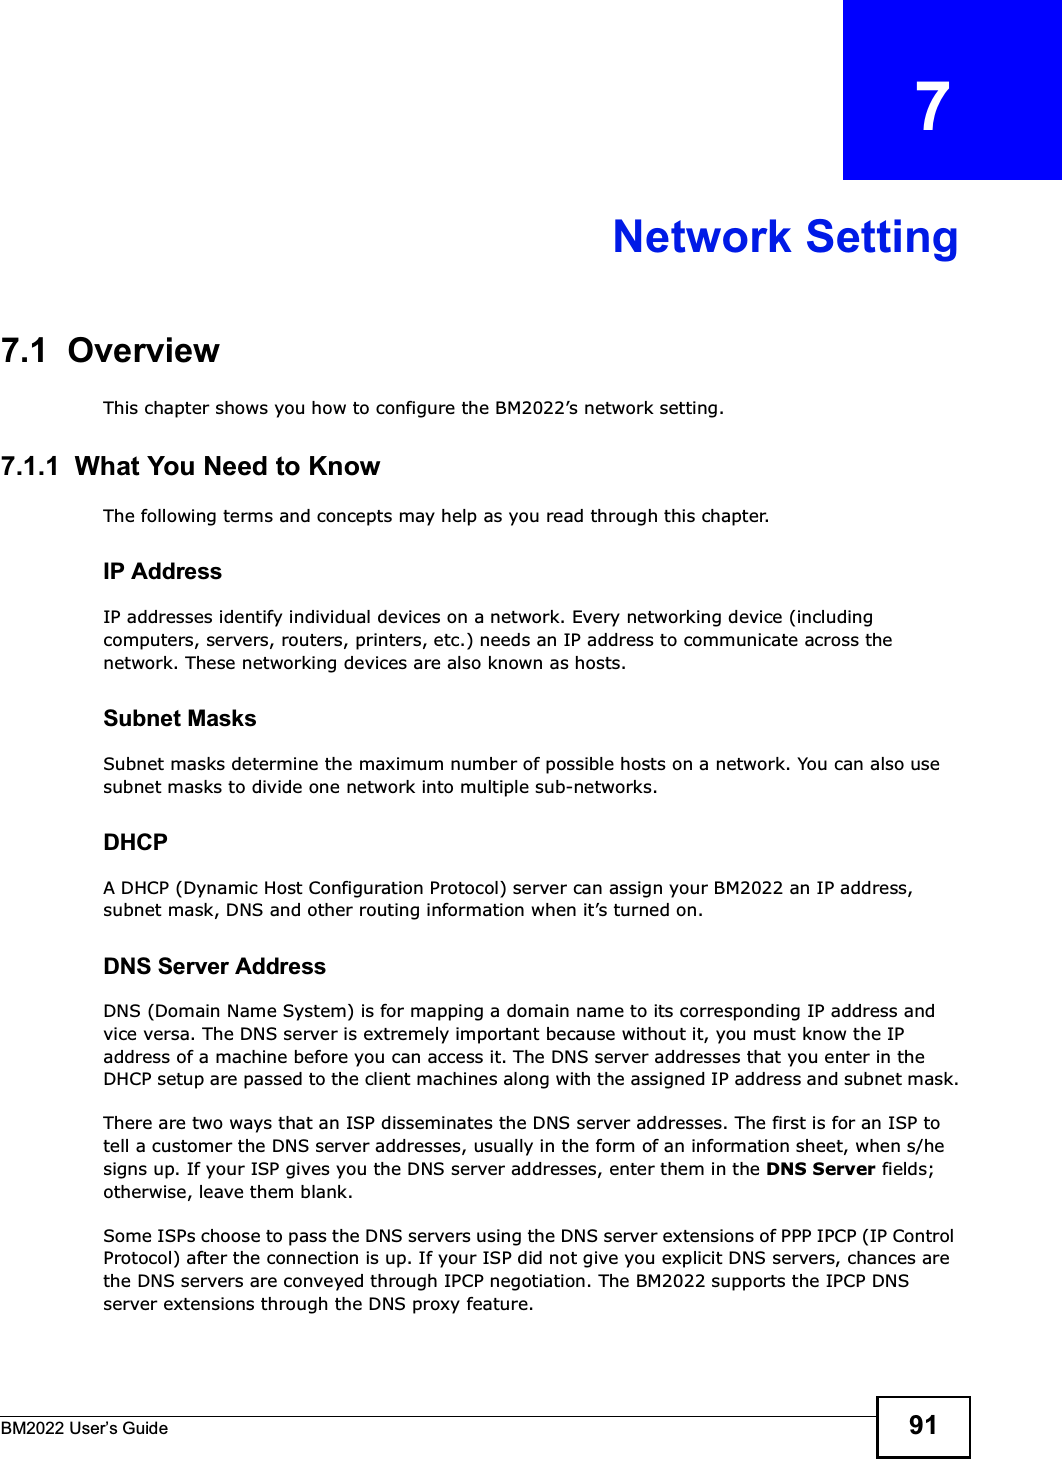 BM2022 Users Guide 91CHAPTER   7Network Setting7.1  OverviewThis chapter shows you how to configure the BM2022s network setting.7.1.1  What You Need to KnowThe following terms and concepts may help as you read through this chapter.IP AddressIP addresses identify individual devices on a network. Every networking device (including computers, servers, routers, printers, etc.) needs an IP address to communicate across the network. These networking devices are also known as hosts.Subnet MasksSubnet masks determine the maximum number of possible hosts on a network. You can also use subnet masks to divide one network into multiple sub-networks.DHCPA DHCP (Dynamic Host Configuration Protocol) server can assign your BM2022 an IP address, subnet mask, DNS and other routing information when its turned on.DNS Server AddressDNS (Domain Name System) is for mapping a domain name to its corresponding IP address and vice versa. The DNS server is extremely important because without it, you must know the IP address of a machine before you can access it. The DNS server addresses that you enter in the DHCP setup are passed to the client machines along with the assigned IP address and subnet mask.There are two ways that an ISP disseminates the DNS server addresses. The first is for an ISP to tell a customer the DNS server addresses, usually in the form of an information sheet, when s/he signs up. If your ISP gives you the DNS server addresses, enter them in the DNS Server fields; otherwise, leave them blank.Some ISPs choose to pass the DNS servers using the DNS server extensions of PPP IPCP (IP Control Protocol) after the connection is up. If your ISP did not give you explicit DNS servers, chances are the DNS servers are conveyed through IPCP negotiation. The BM2022 supports the IPCP DNS server extensions through the DNS proxy feature.